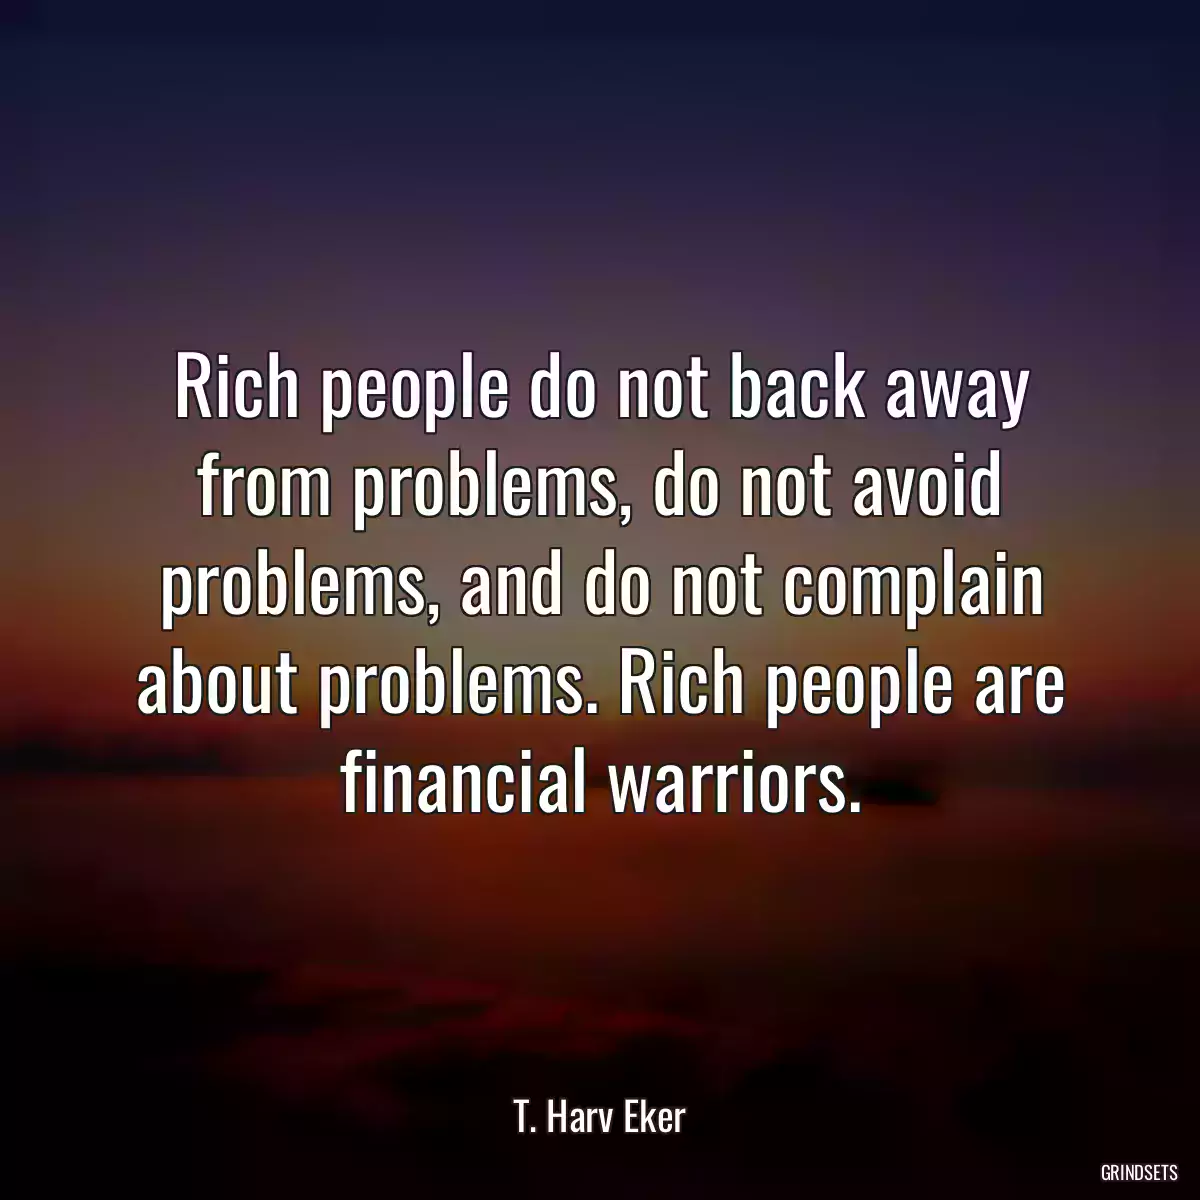 Rich people do not back away from problems, do not avoid problems, and do not complain about problems. Rich people are financial warriors.